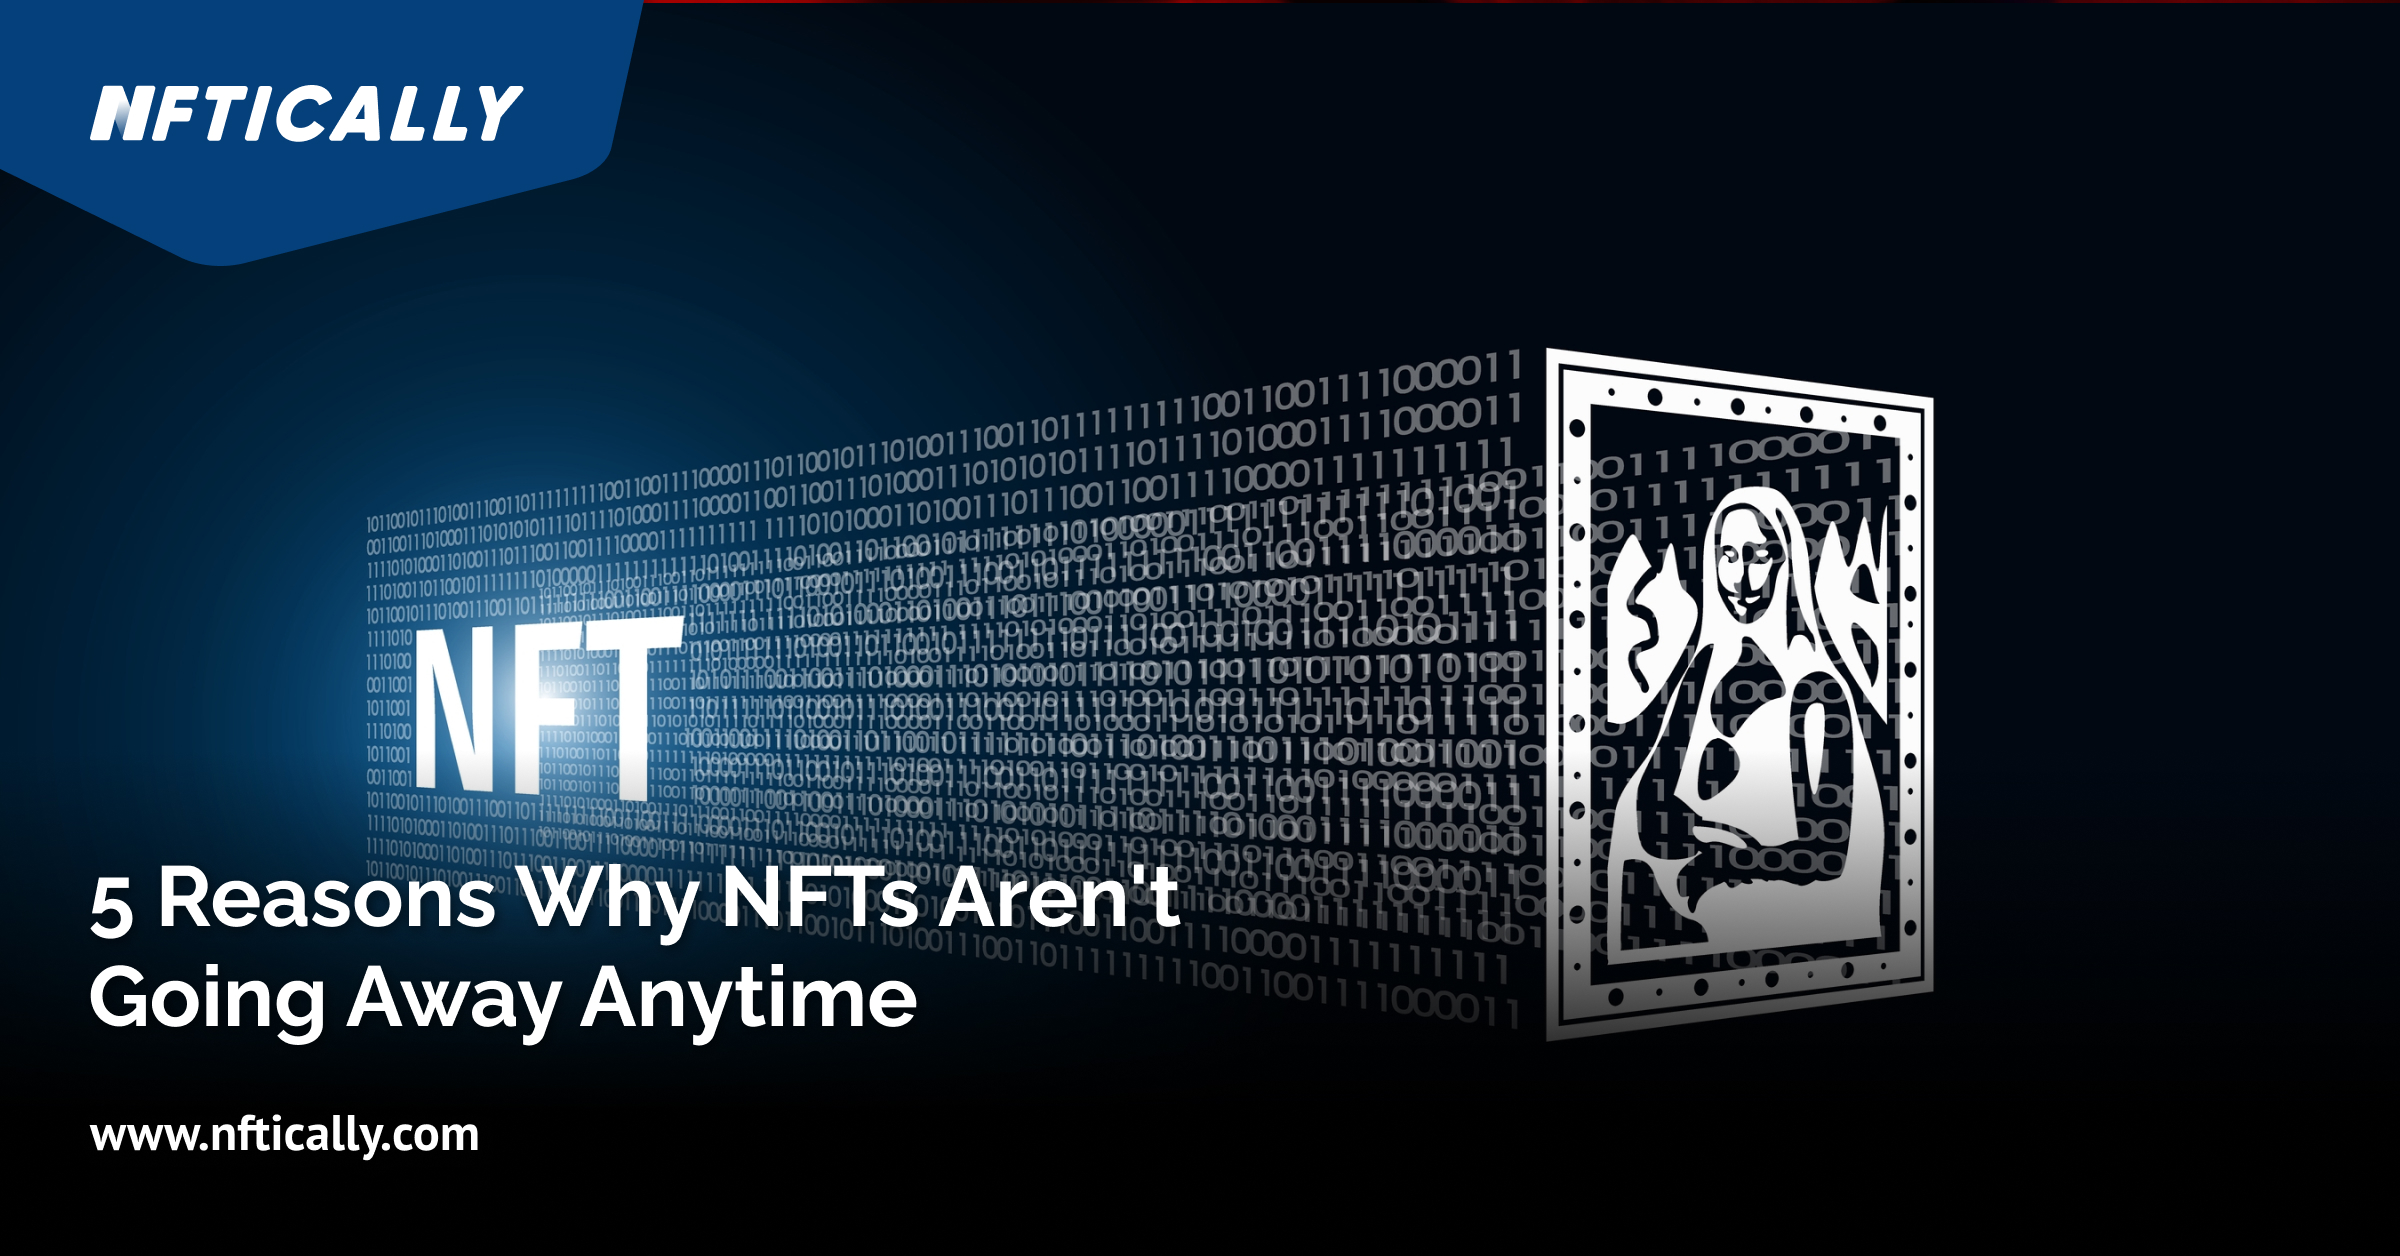 5 Reasons Why NFTs Aren’t Going Away Anytime